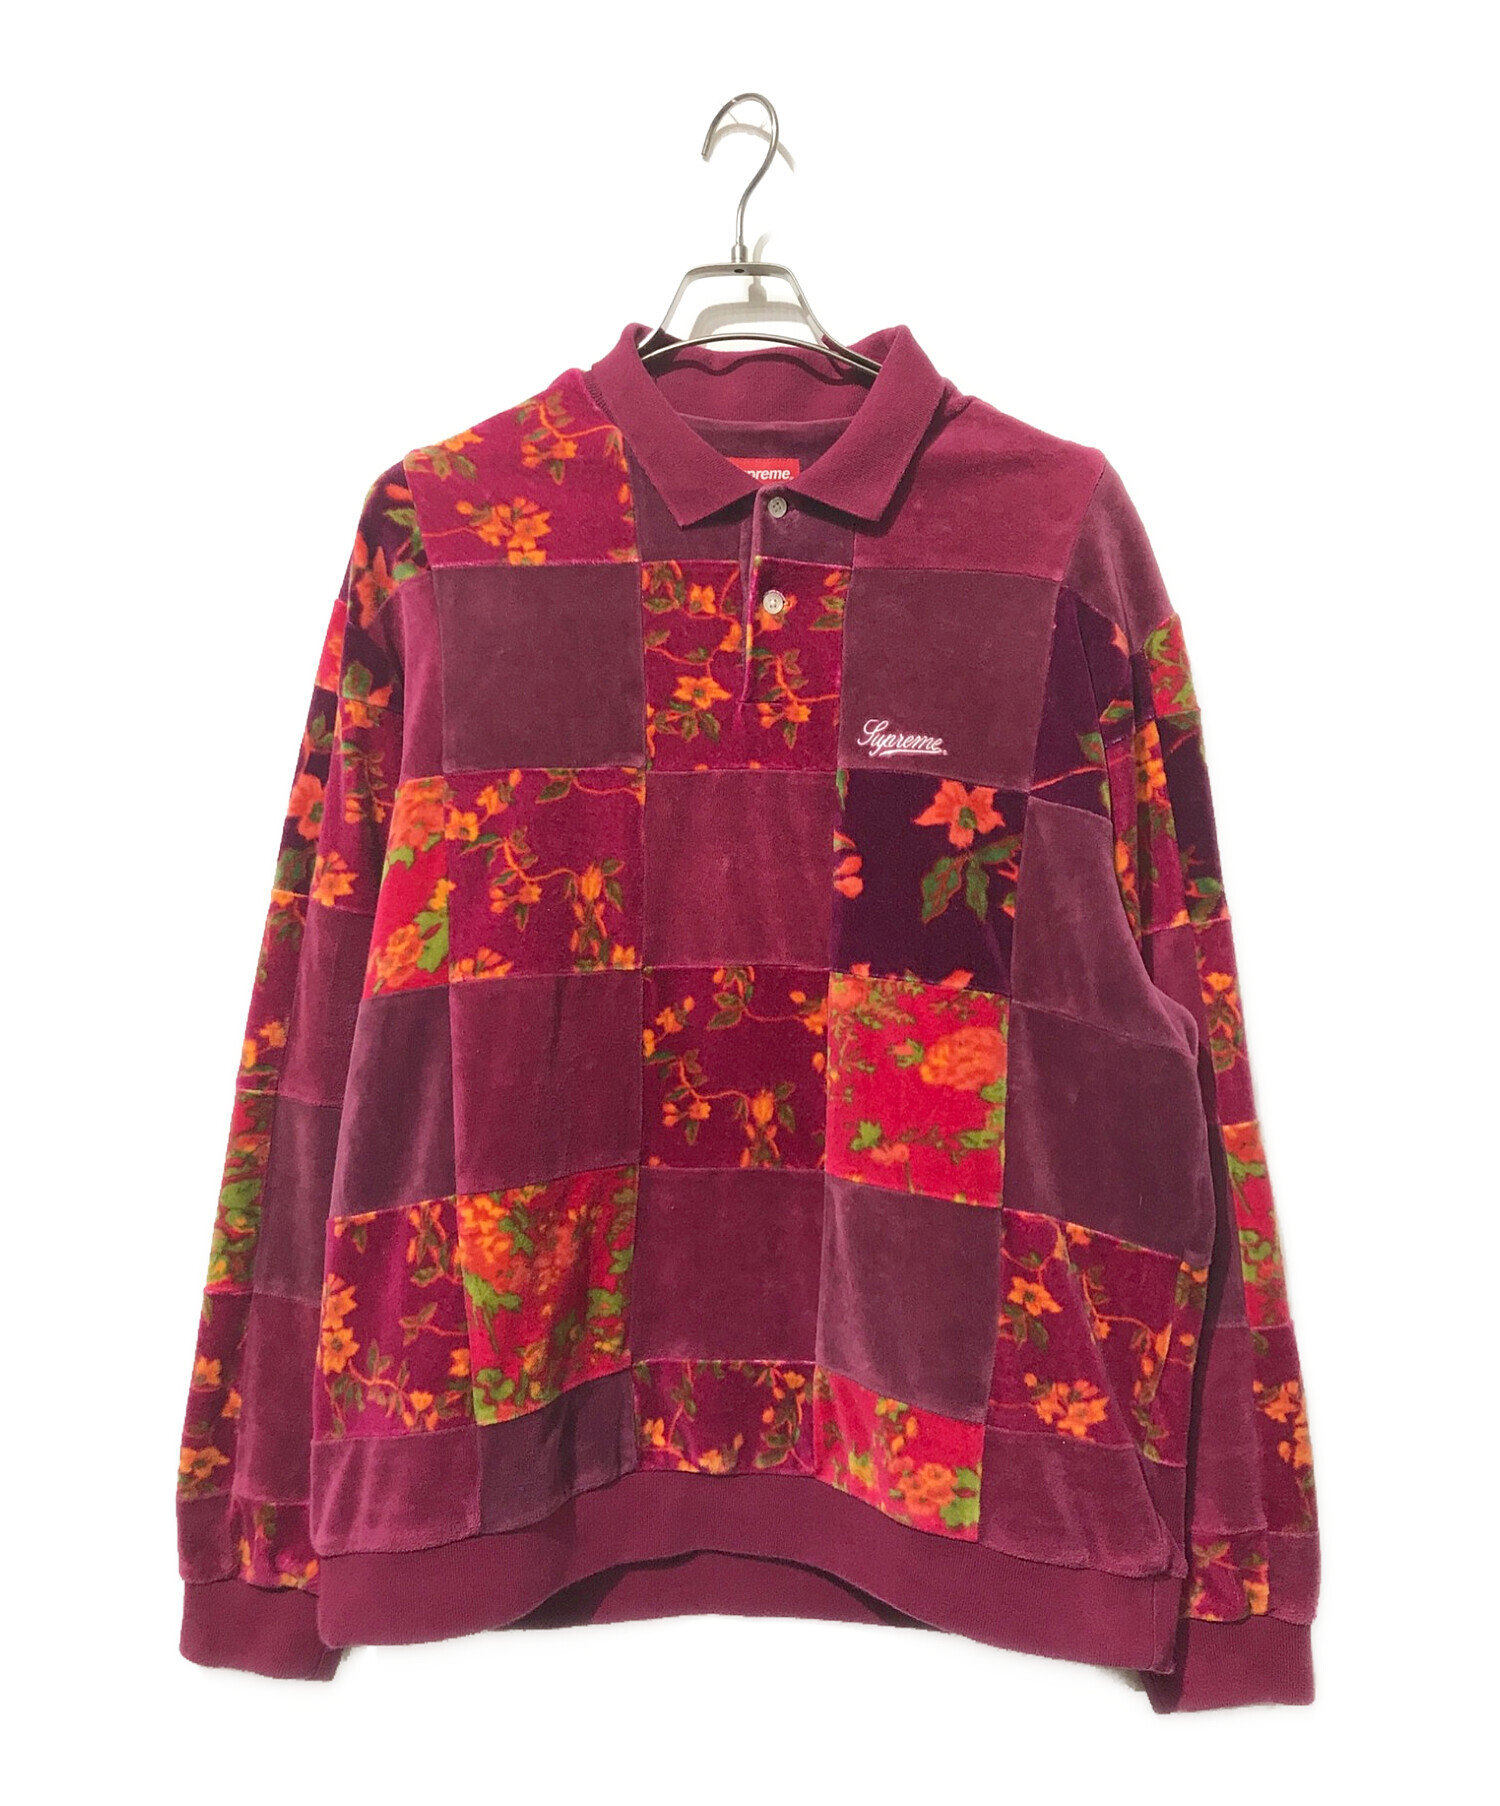 SUPREME (シュプリーム) Floral Patchwork Velour L/S Polo/ベロアポロシャツ パープル サイズ:M